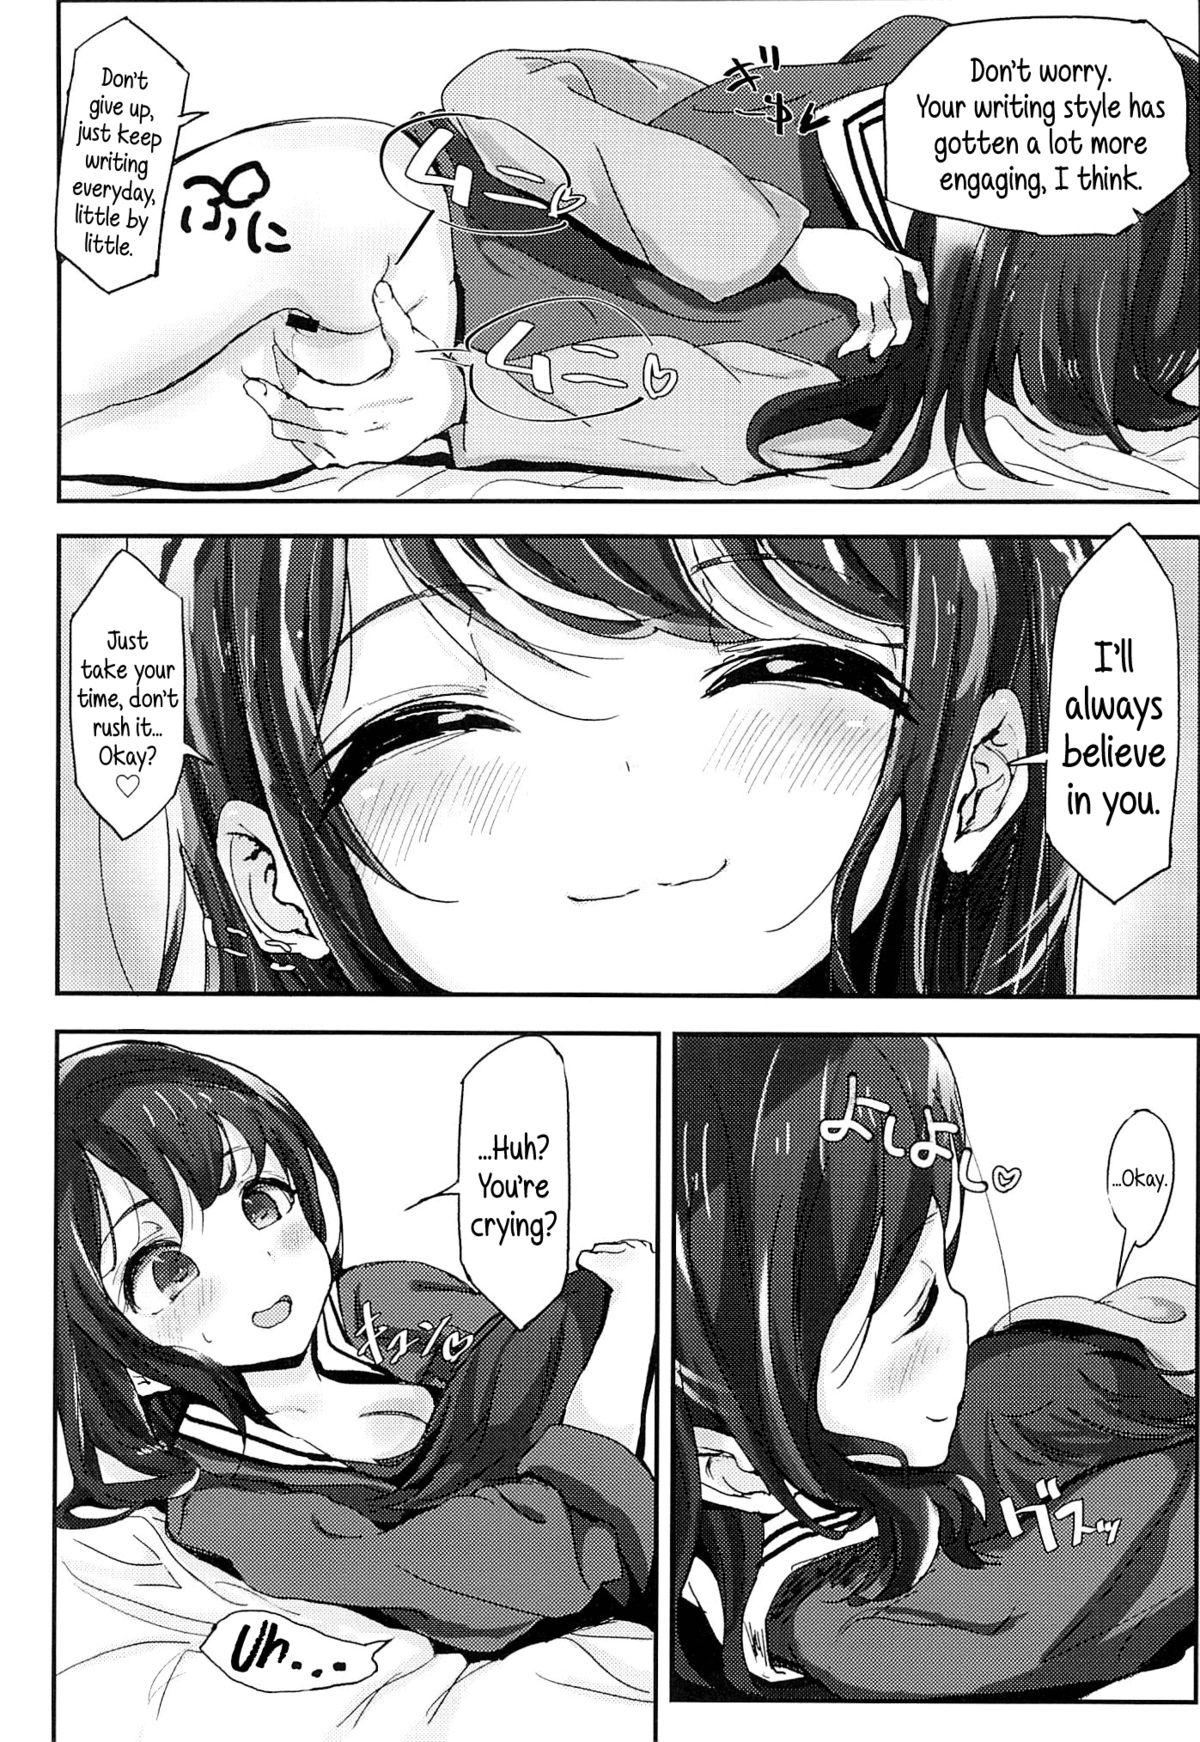 Sperm Shikyuukou no Kanata, Onii chan no Hate | Beyond the mouth of the uterus lies Onii-chan’s demise Ejaculation - Page 11